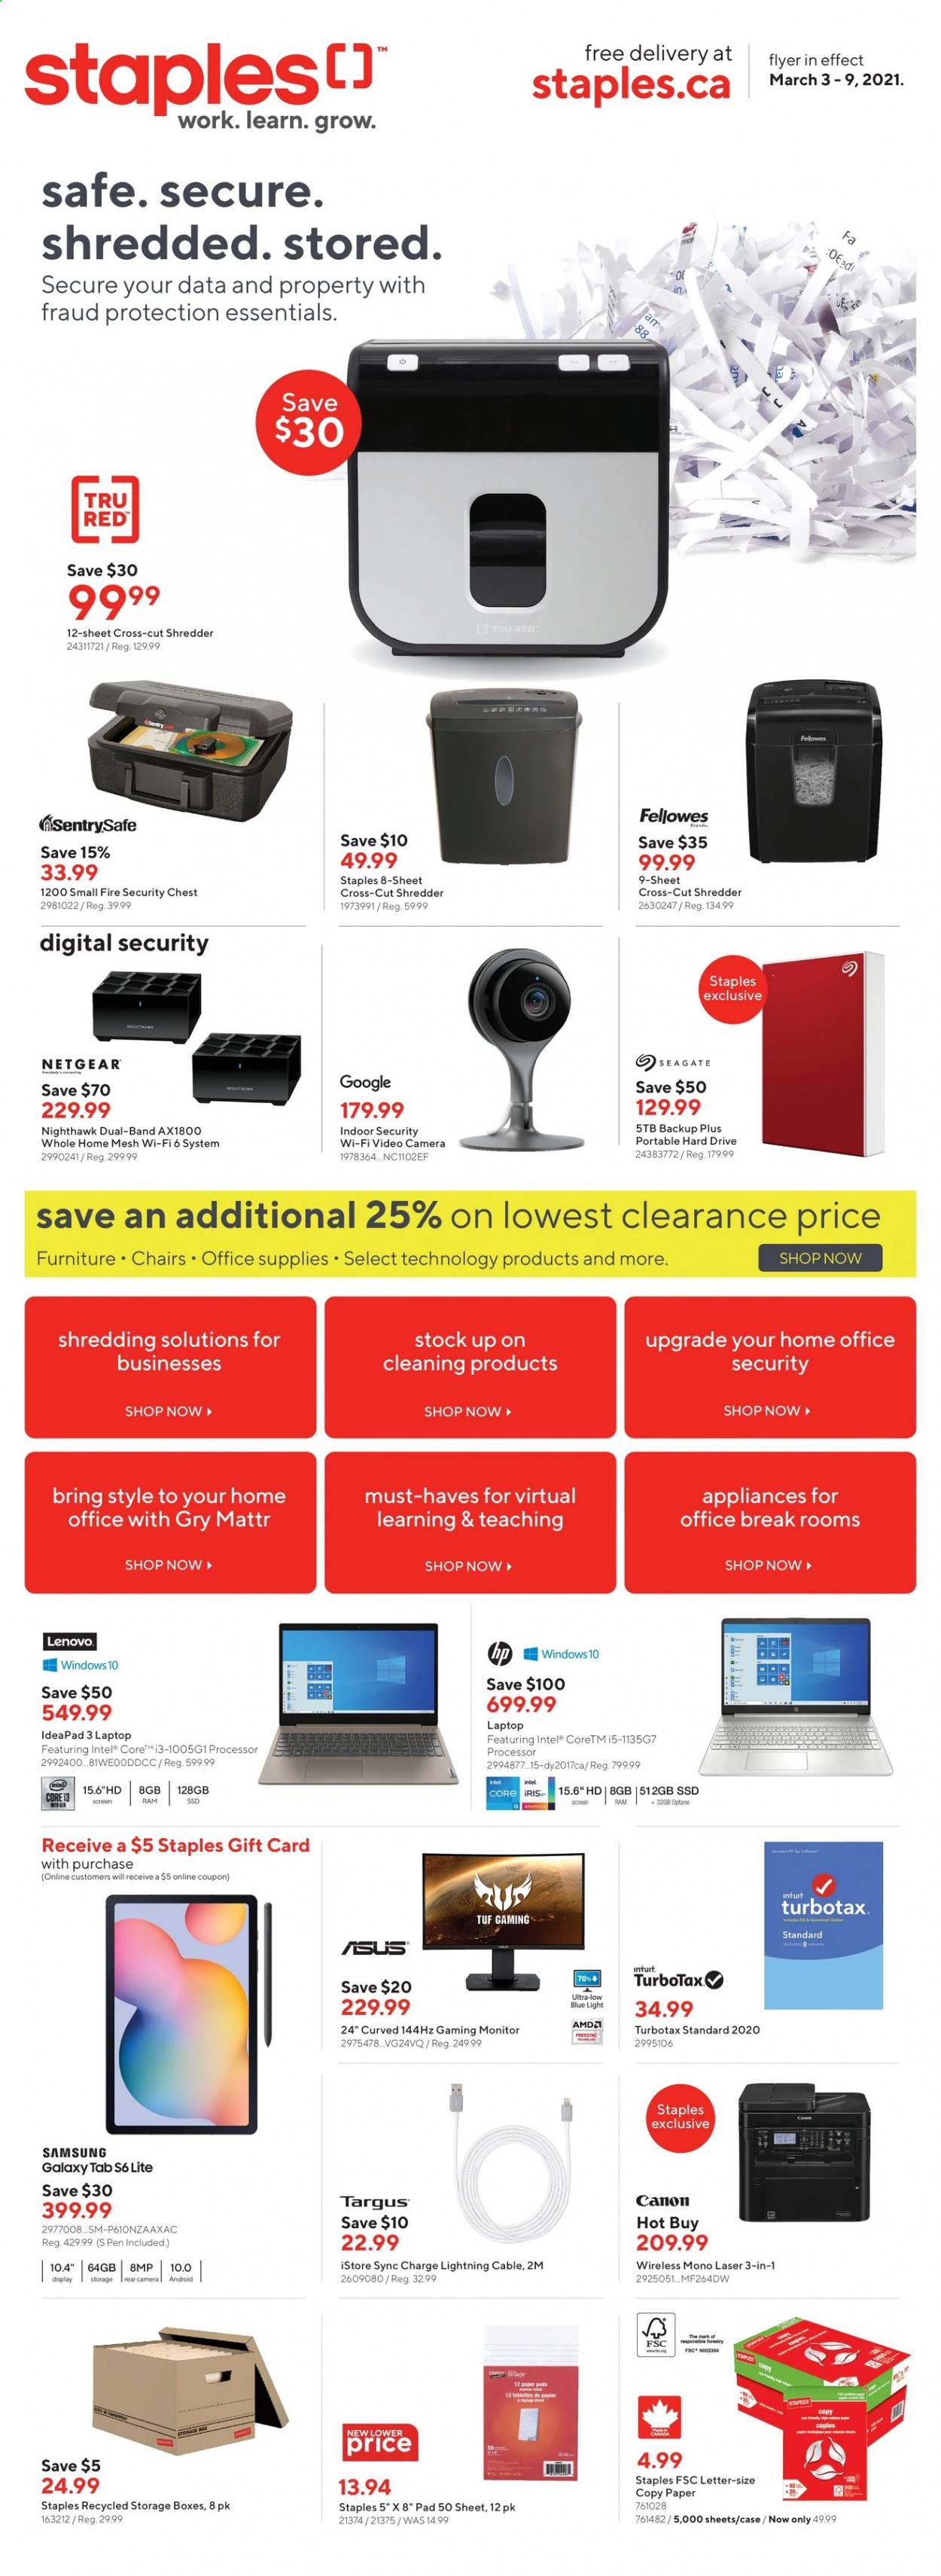 thumbnail - Staples Flyer - March 03, 2021 - March 09, 2021 - Sales products - Intel, Samsung Galaxy, Samsung Galaxy Tab, pen, paper, Seagate, hard disk, Netgear, portable hard drive, shredder, laptop, Lenovo, monitor, Samsung. Page 1.